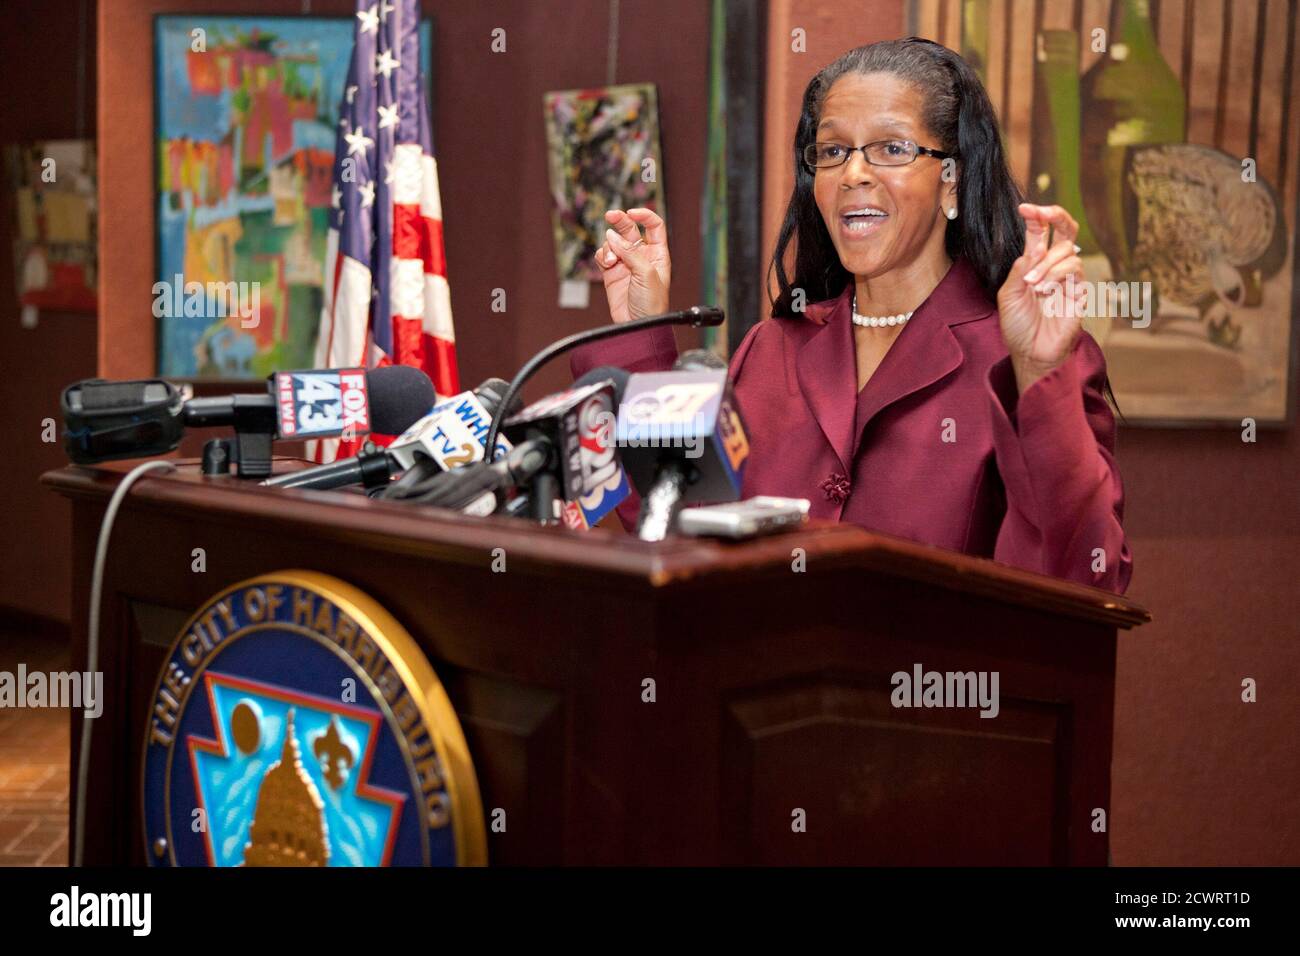 City of Harrisburg Mayor Linda Thompson holds a news conference in Harrisburg, Pennsylvania, October 12, 2011. Mayor Thompson indicated the procedure by Harrisburg city council are illegal. Pennsylvania's capital, Harrisburg, filed